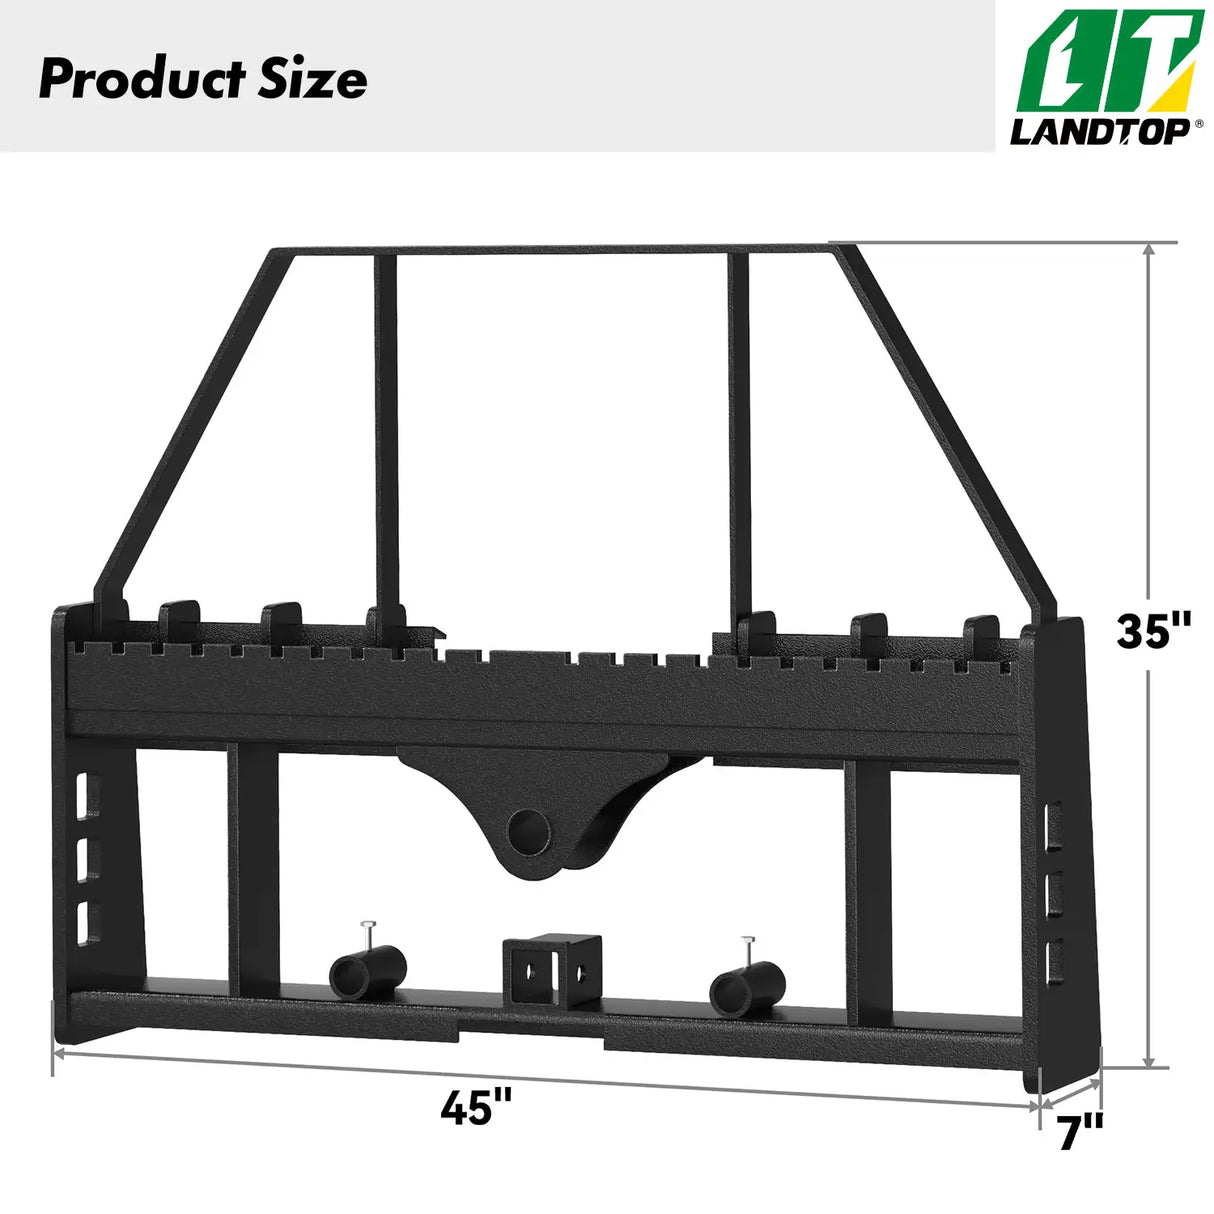 4000lbs Pallet Fork Frame Attachment, 45" Skid Steer Pallet Fork Frame with 2" Hitch Receiver & Spear Sleeves for Loaders Tractors Quick Tach Mount